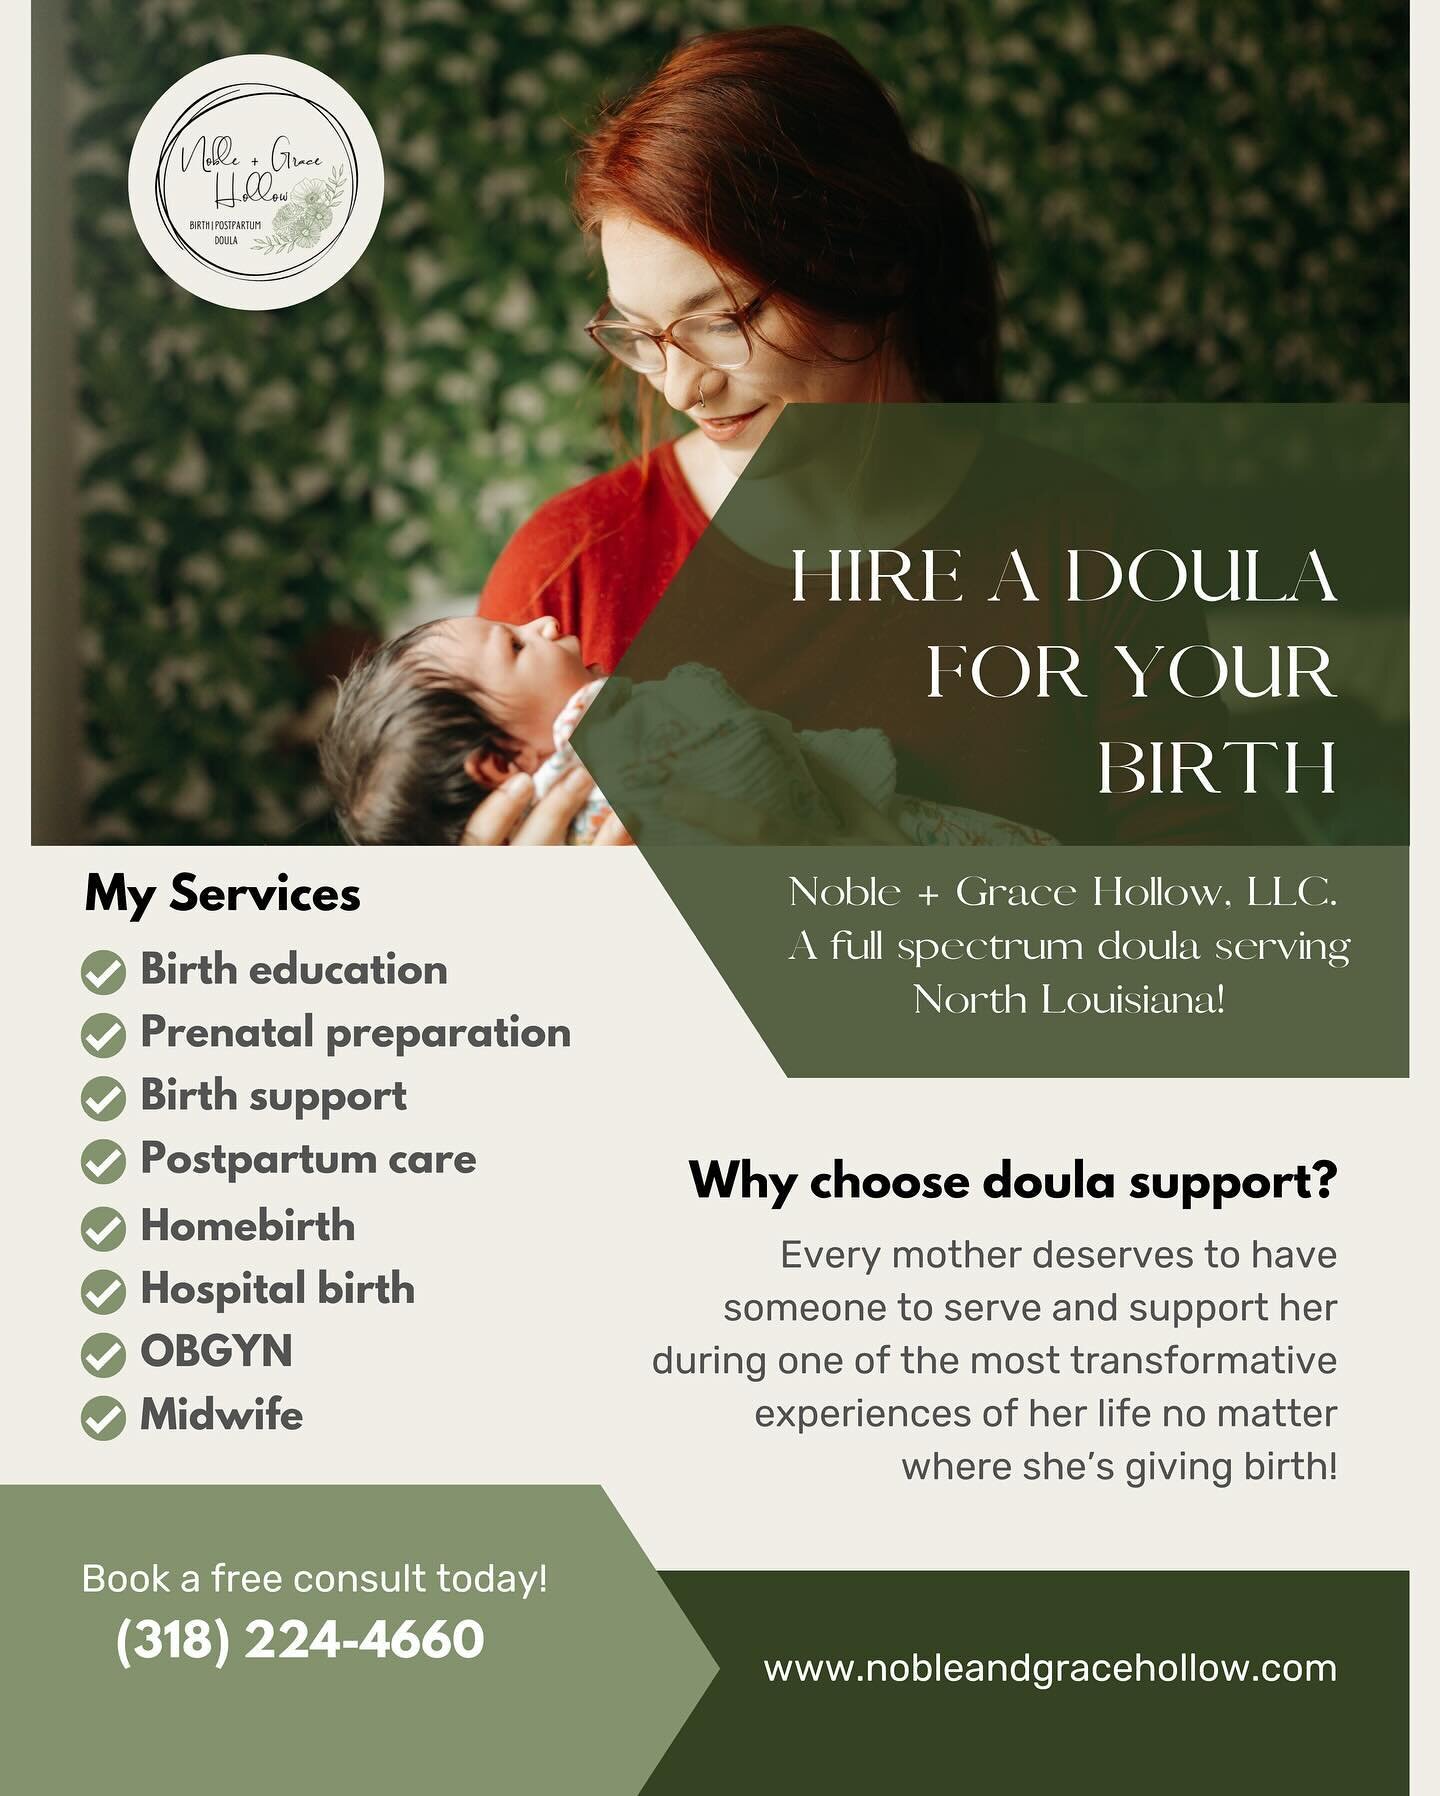 TRANSFORM YOUR BIRTH EXPERIENCE

Hiring a doula can transform your birth experience! If you&rsquo;re looking for support during your pre-natal, birth, and postpartum period, Noble and Grace Hollow is here. 

Noble and Grace Hollow is a North Louisian